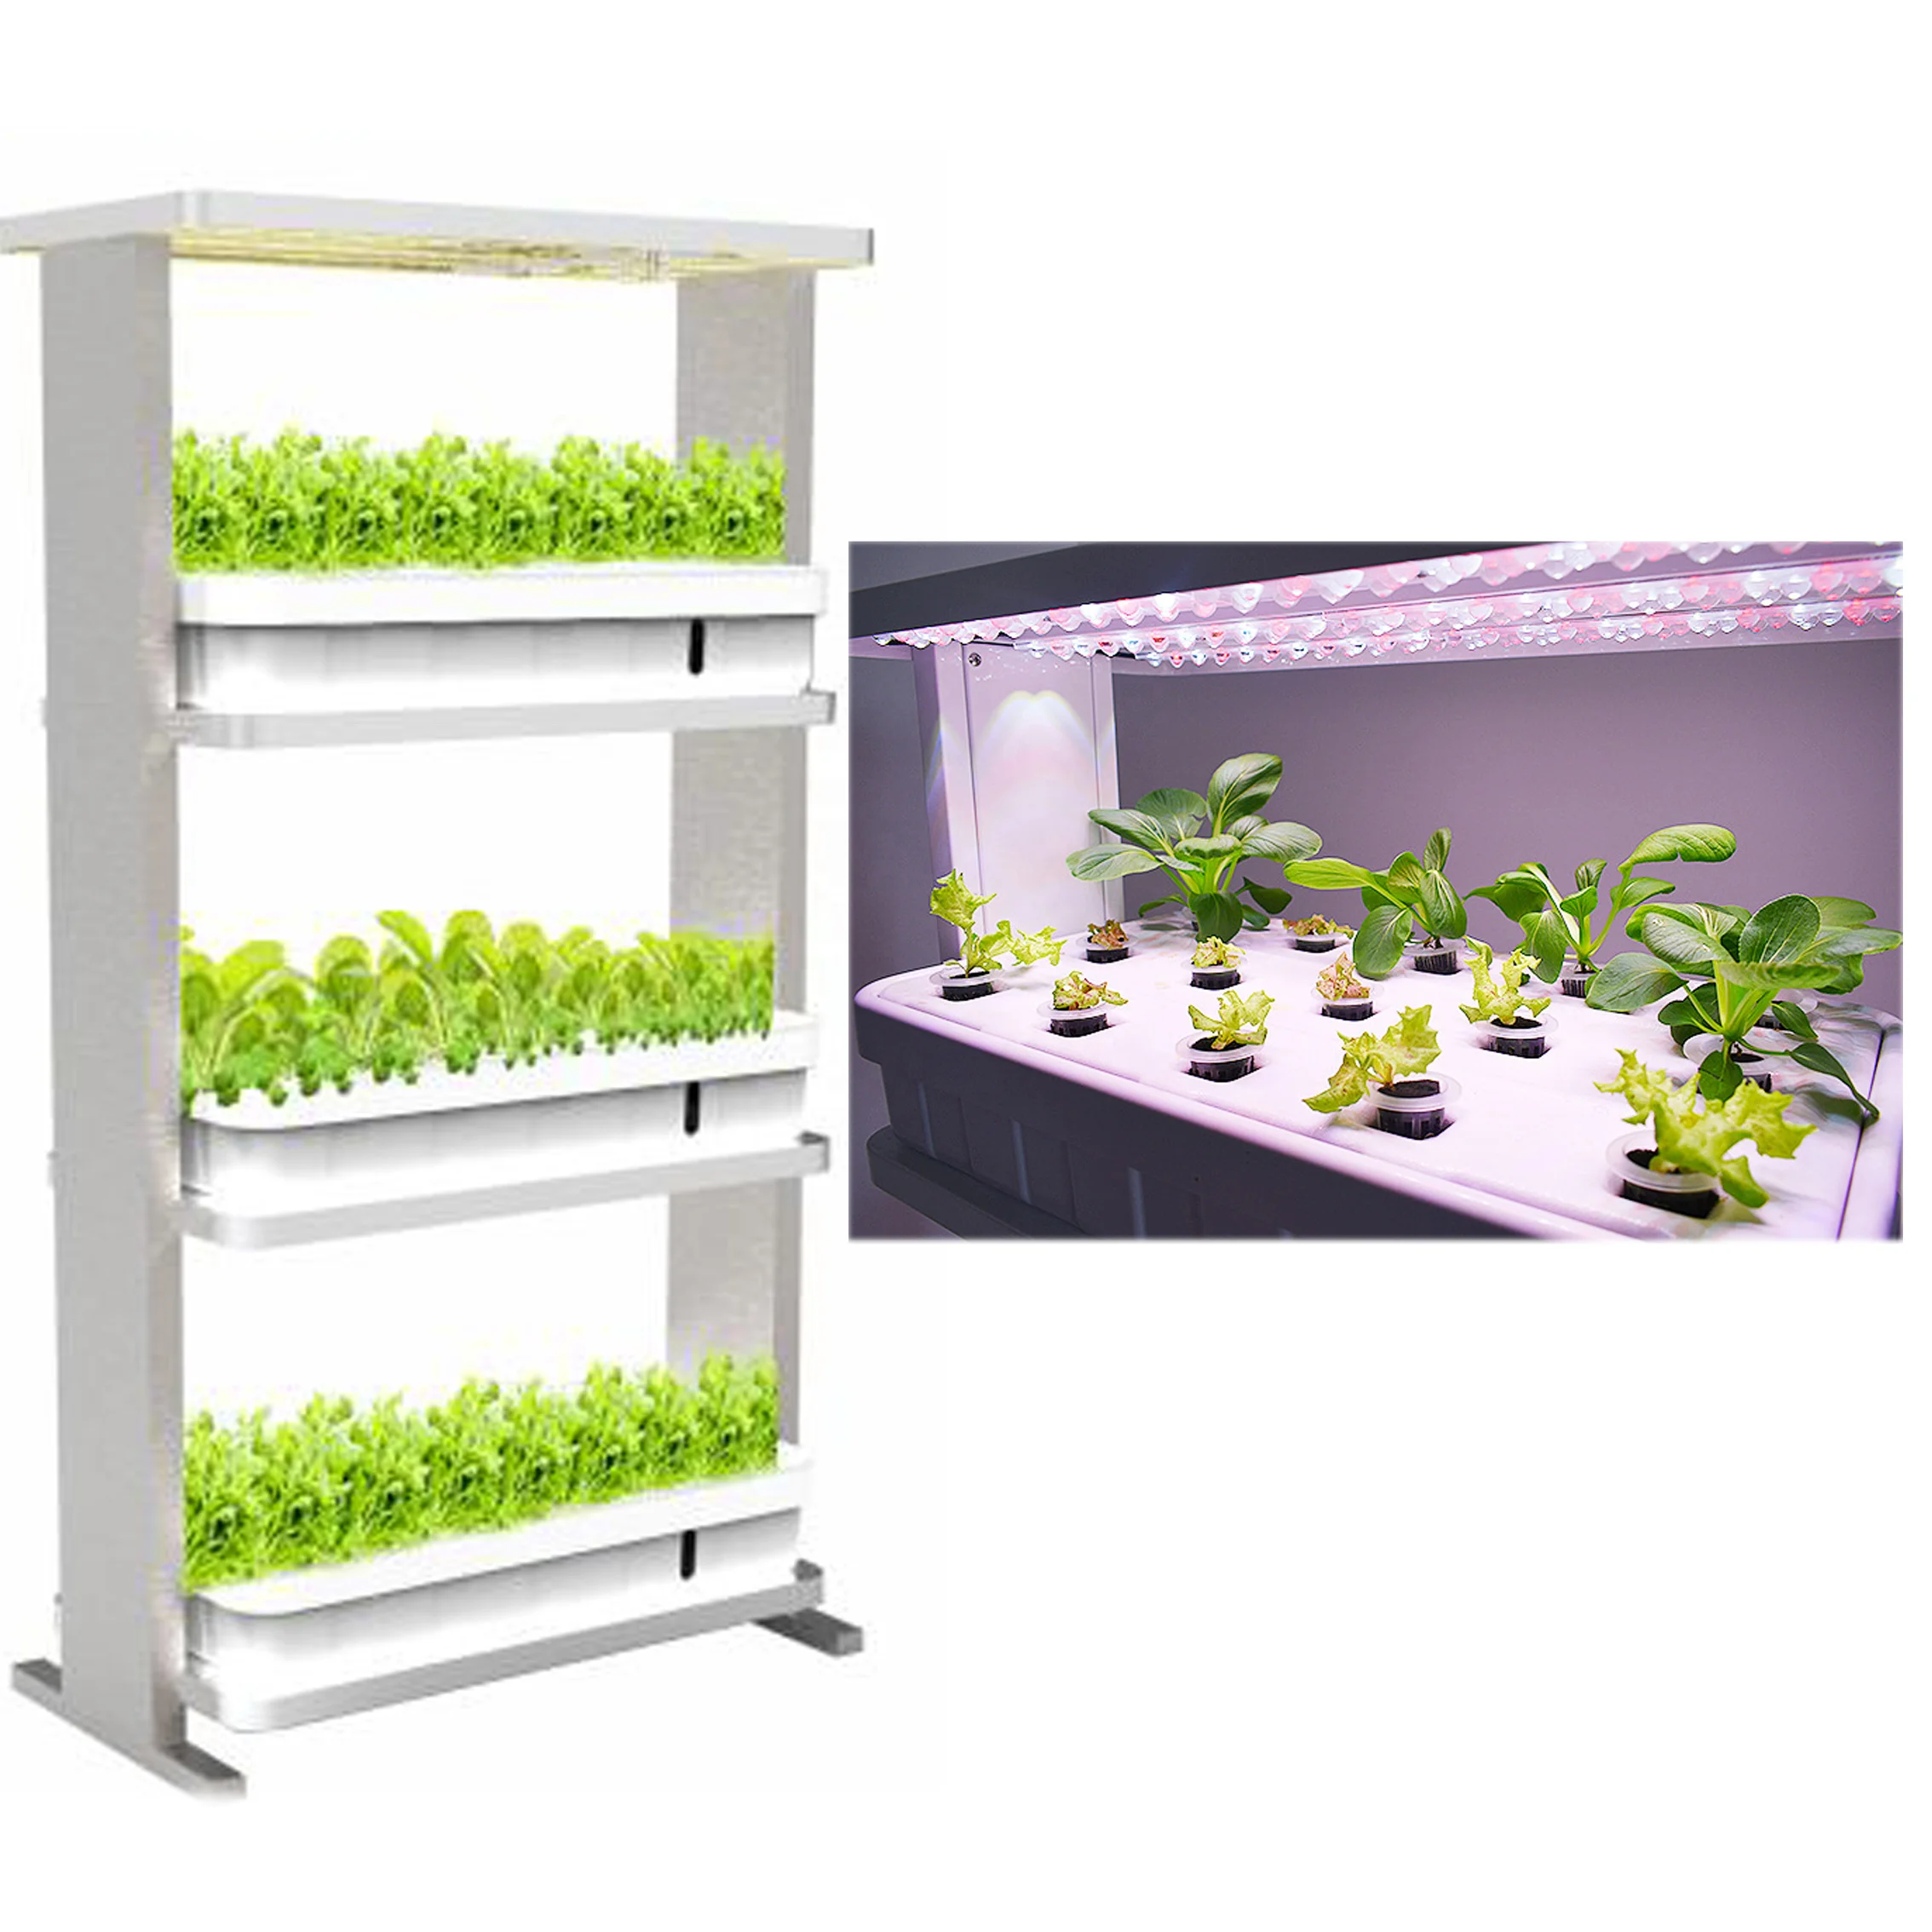 How To Start A Hydroponic Garden Eminetra Canada